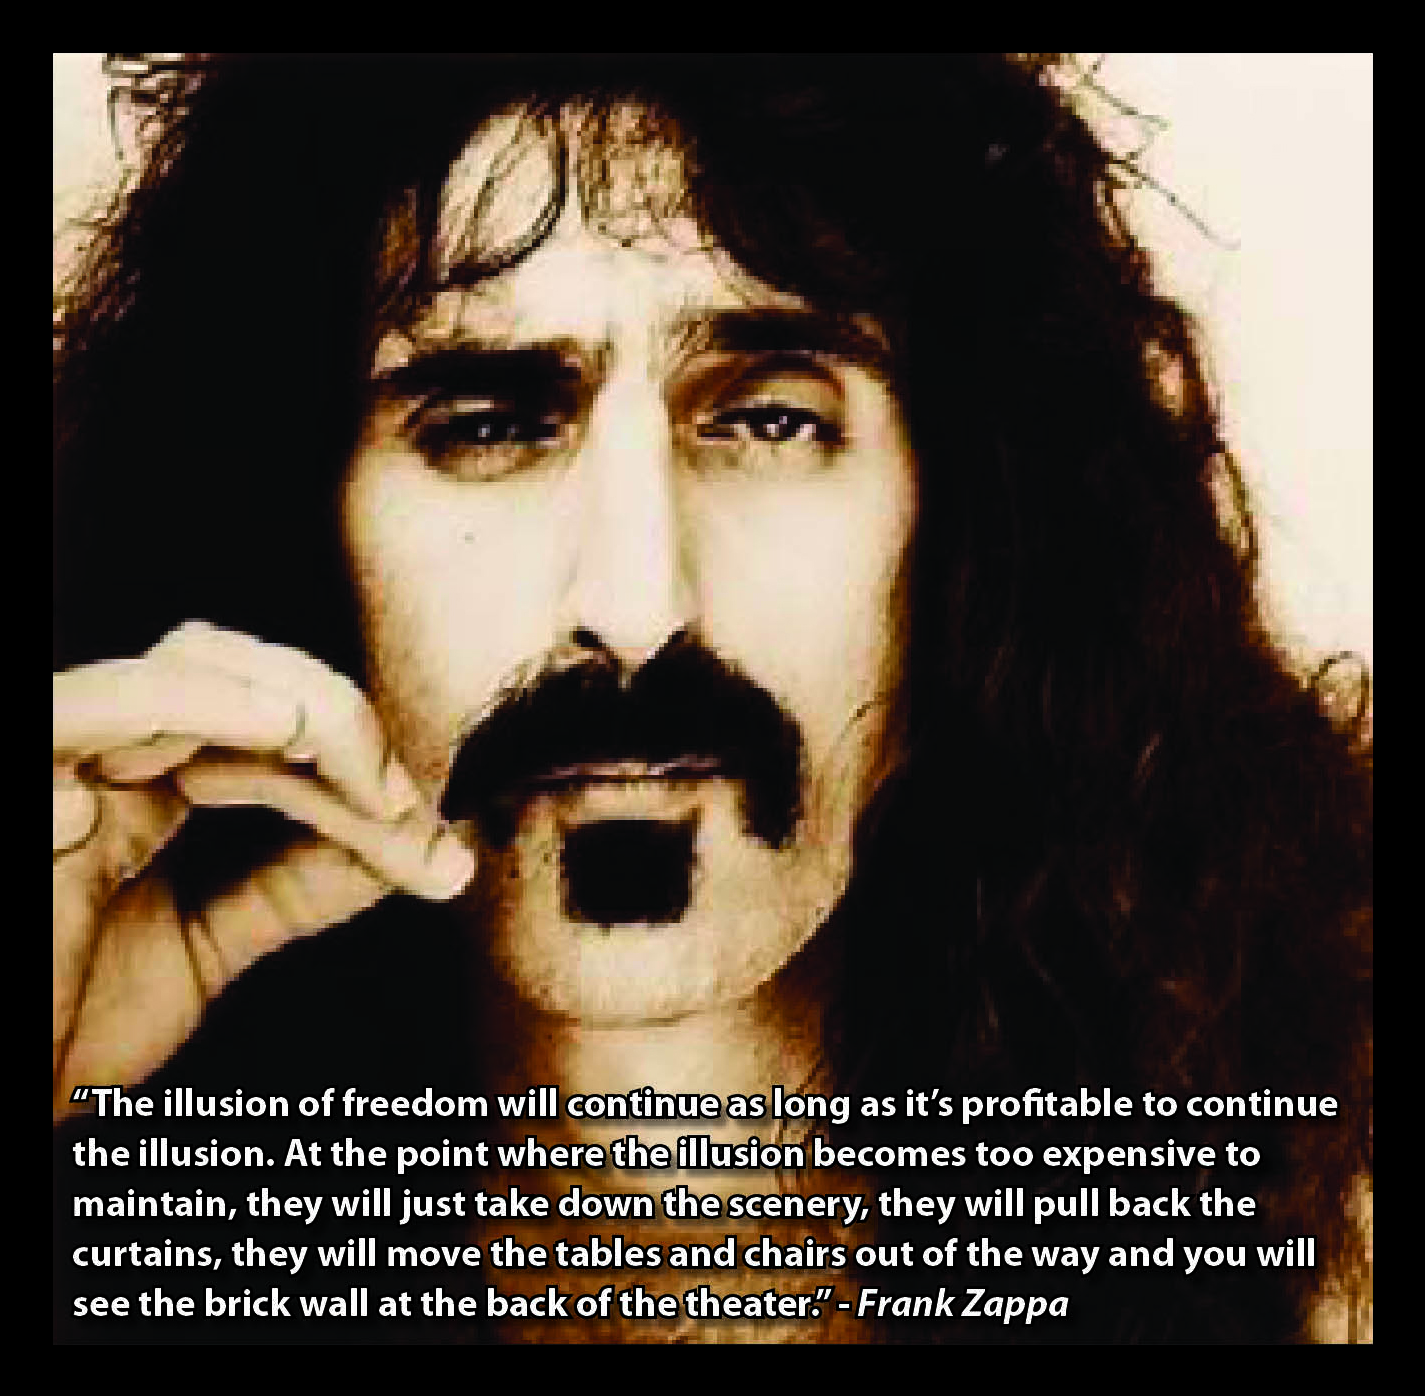 A great quote by Frank Zappa....some called him crazy...by the looks of the world today, I'd say he was a visionary.